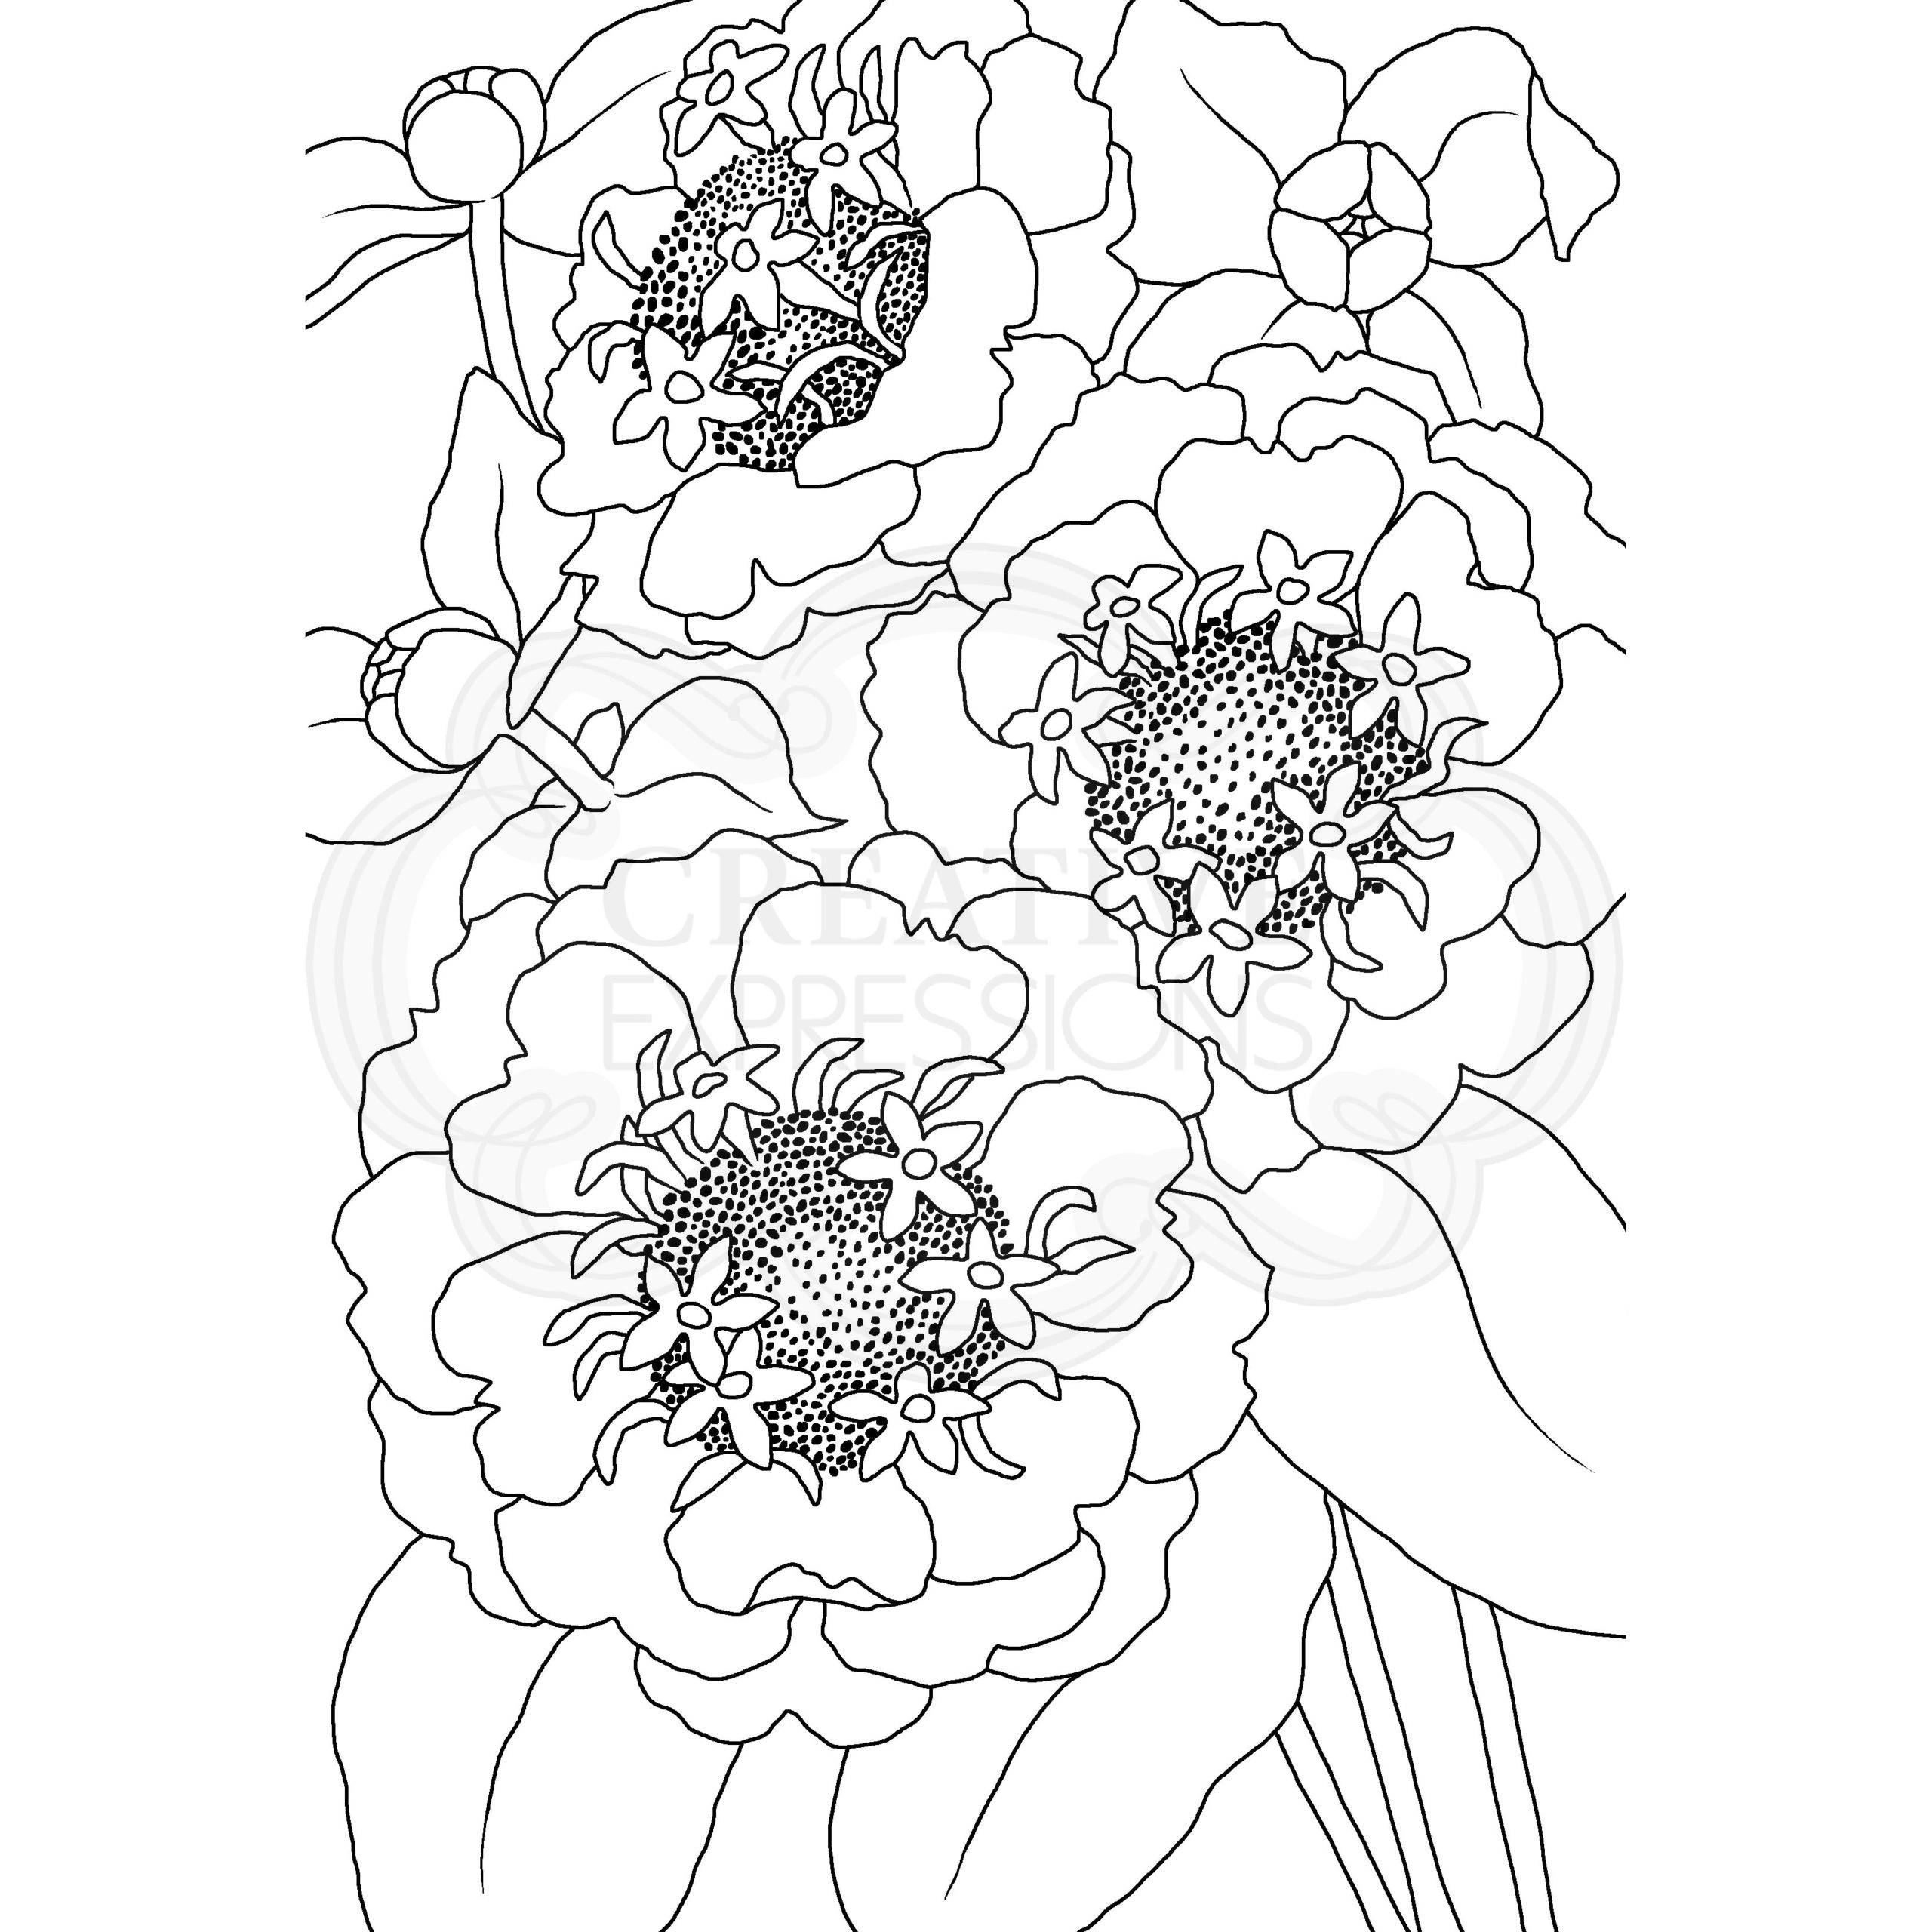 Woodware Clear Singles Zinnia 4 in x 6 in Stamp